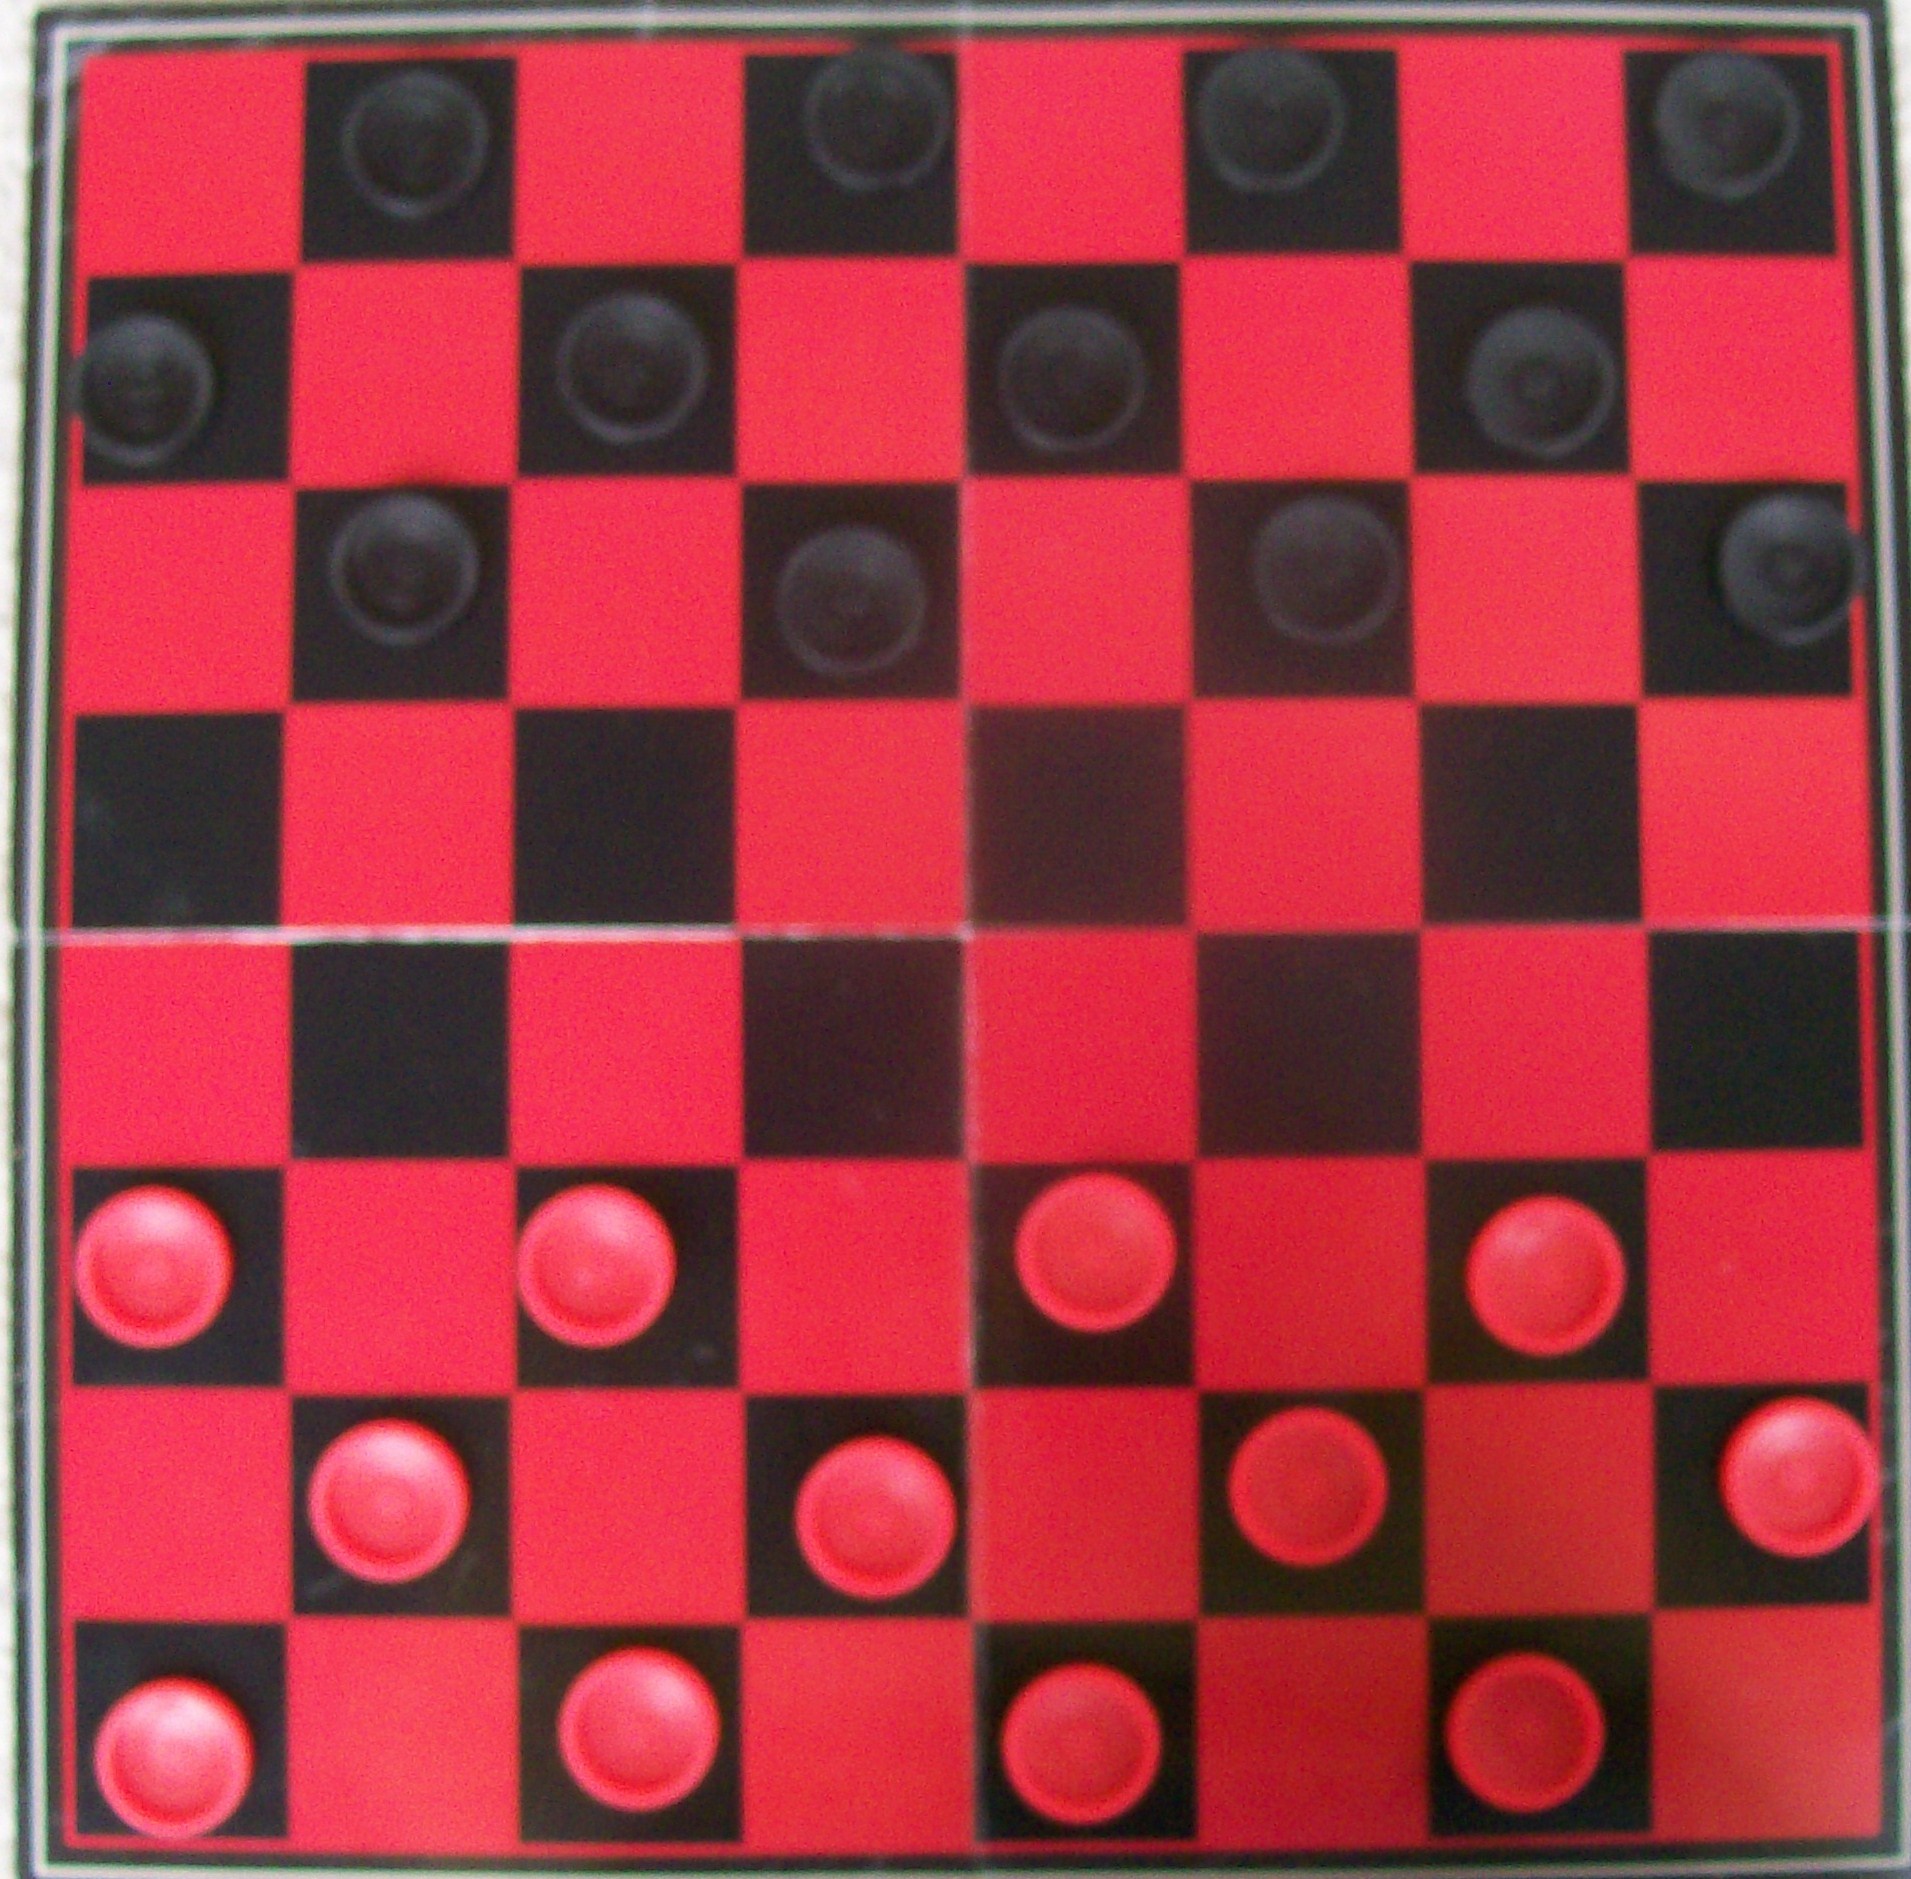 How To Play Checkers All About Fun And Games